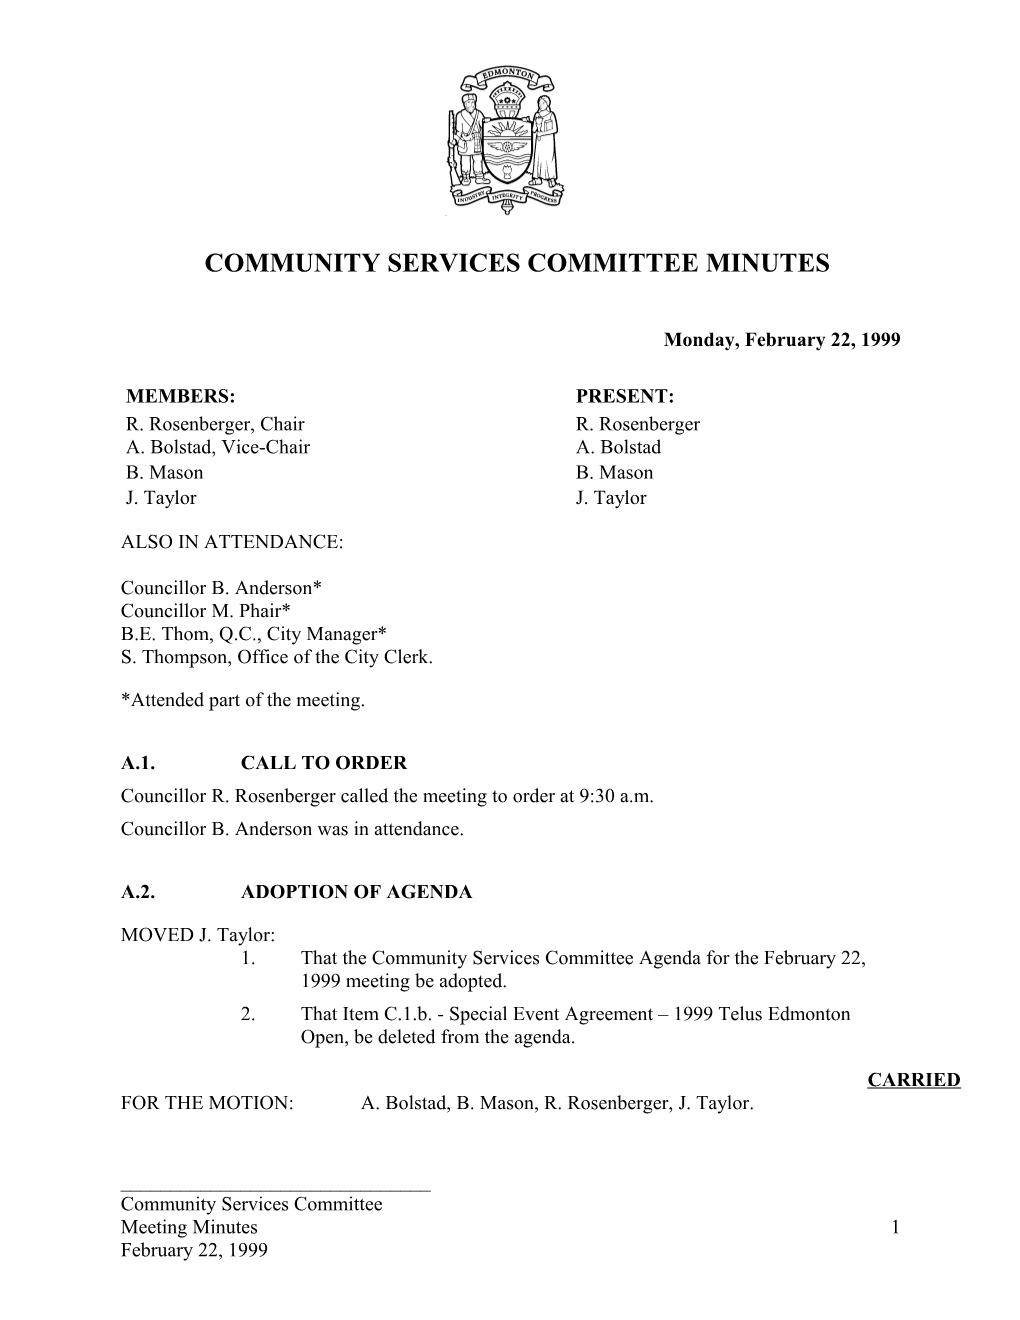 Minutes for Community Services Committee February 22, 1999 Meeting